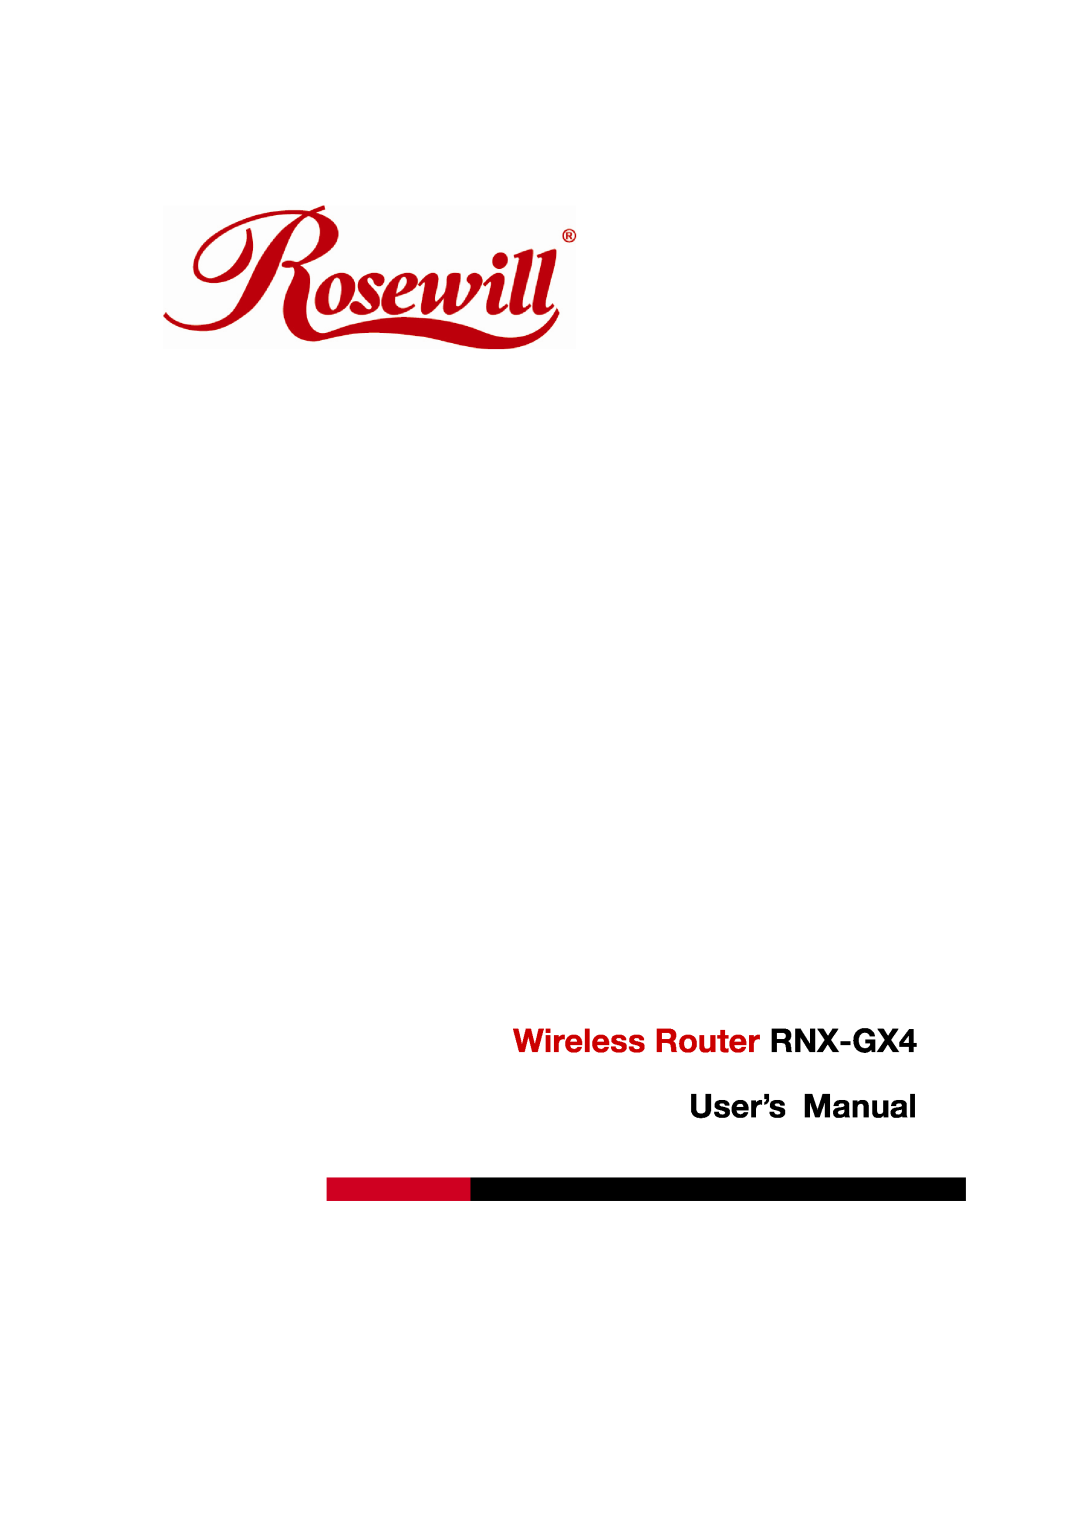 Rosewill user manual Wireless Router RNX-GX4, User’s Manual 